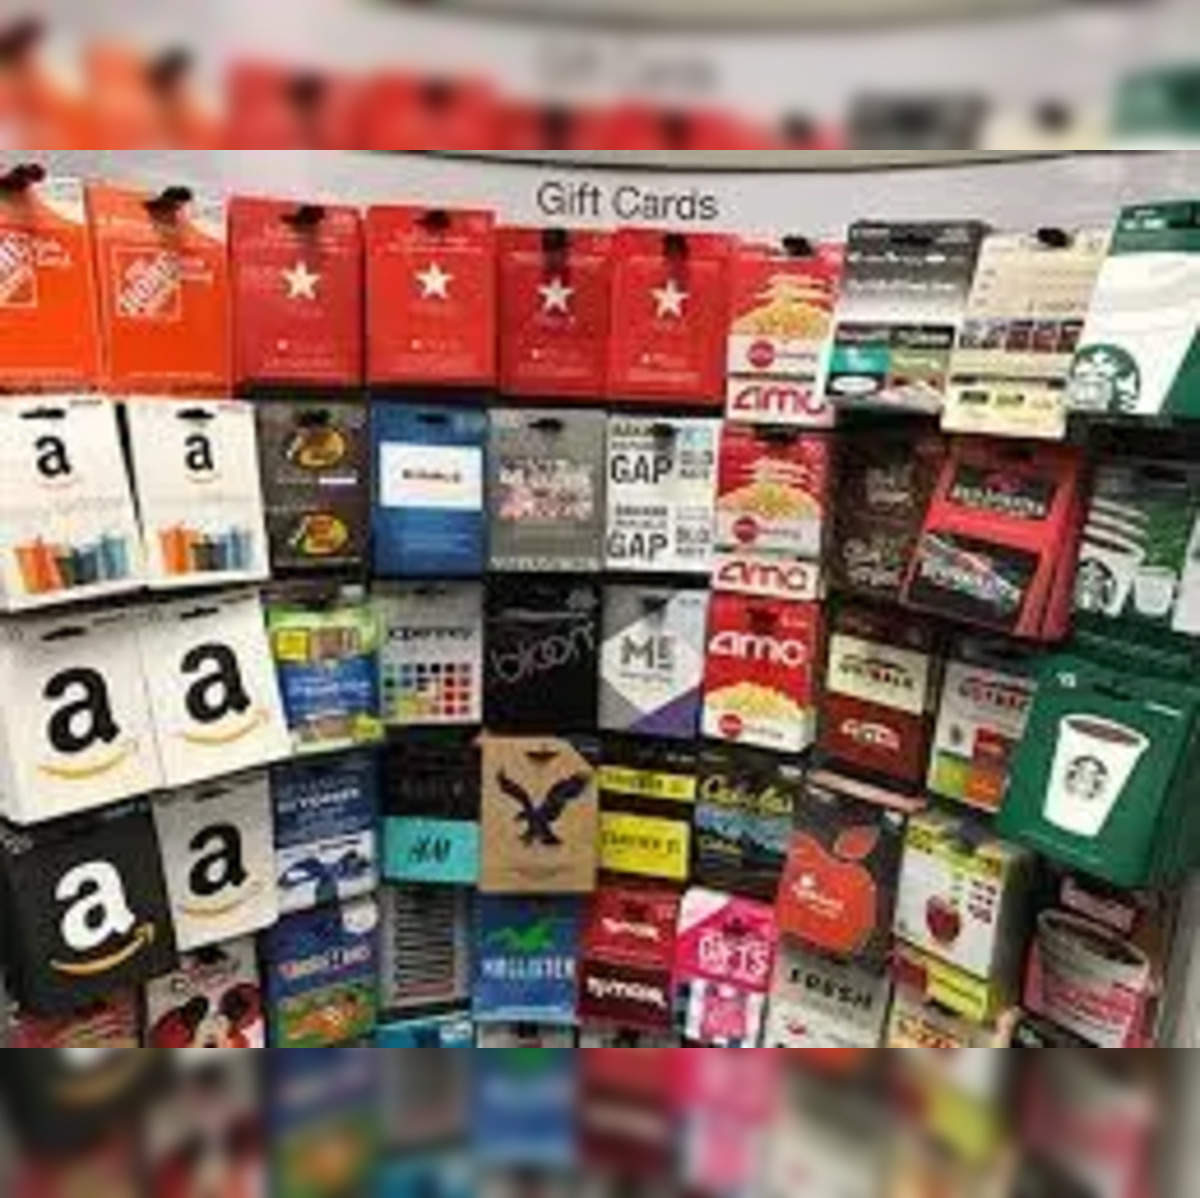 How to recoup unused gift card funds through NYS